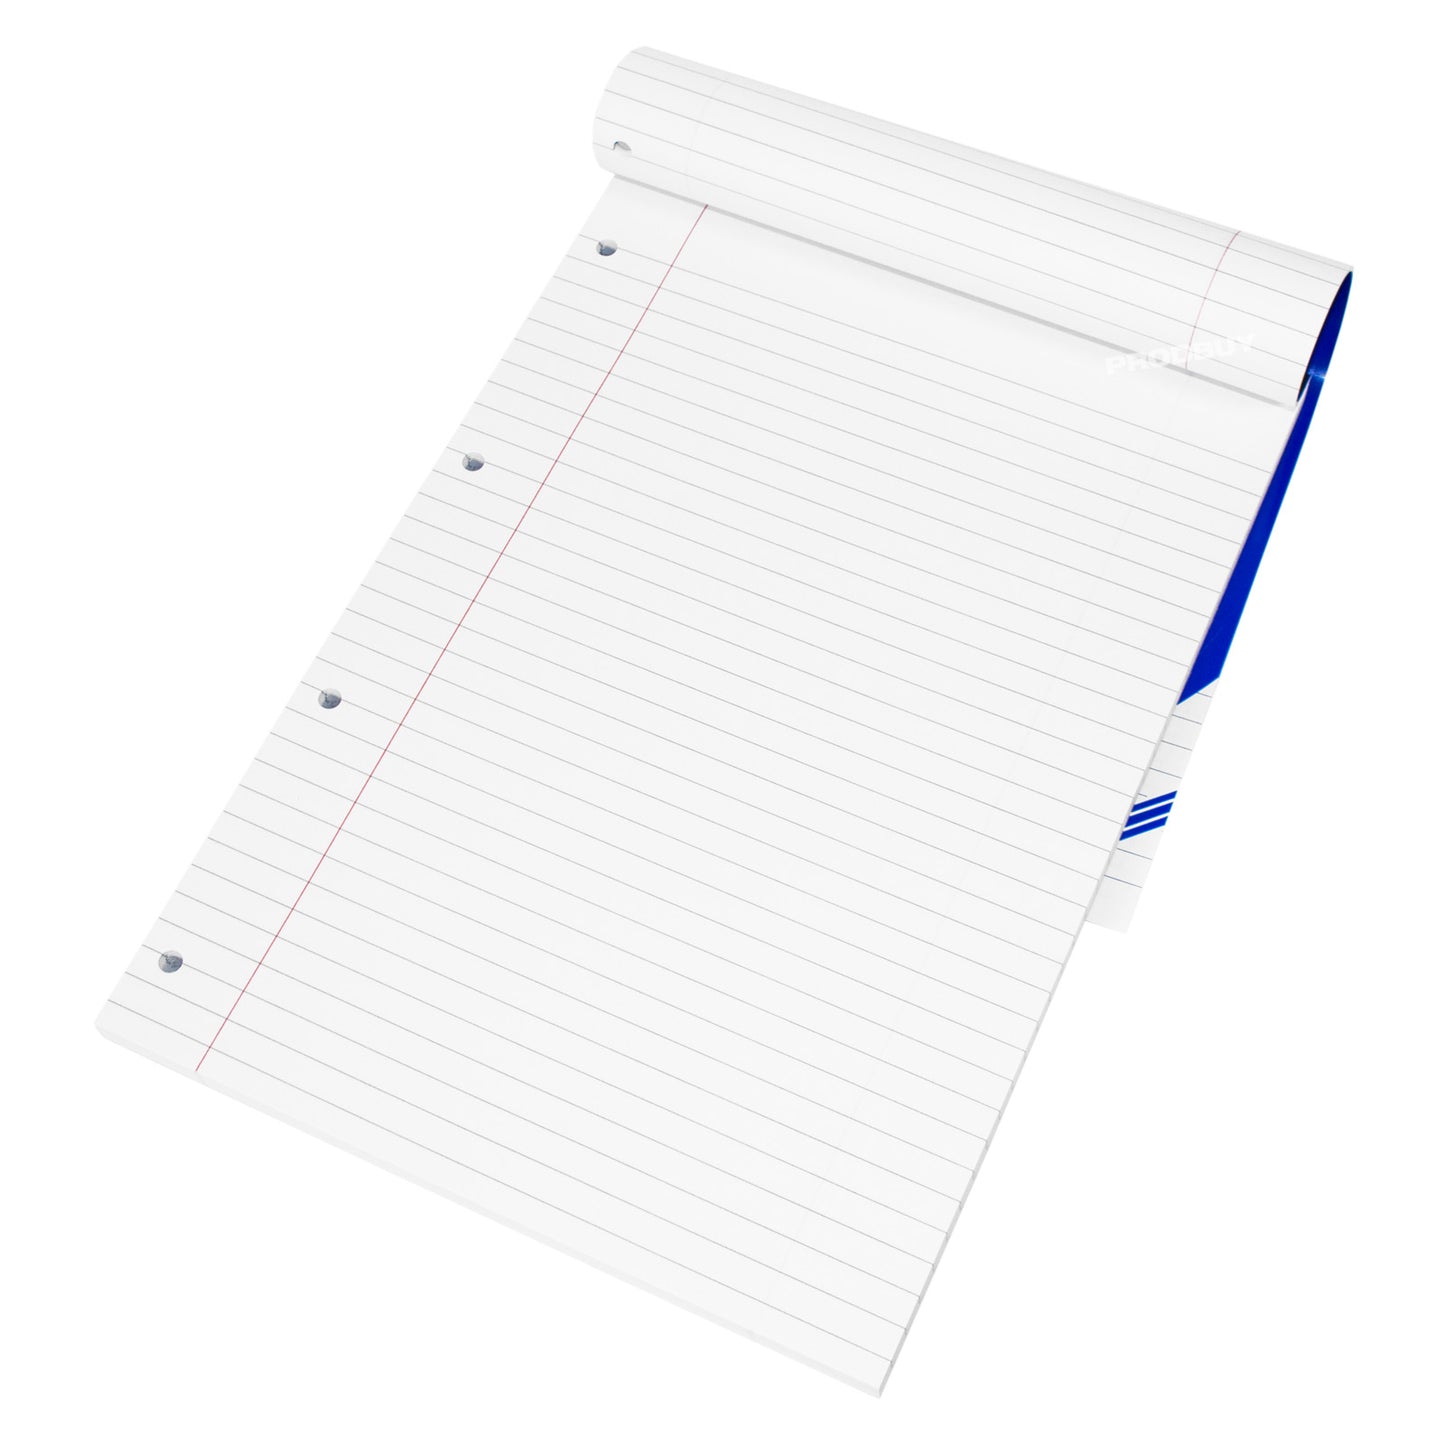 Pack of 3 A4 Top Refill Pads 160 Sheet (320 Page) Lined Memo Notepads